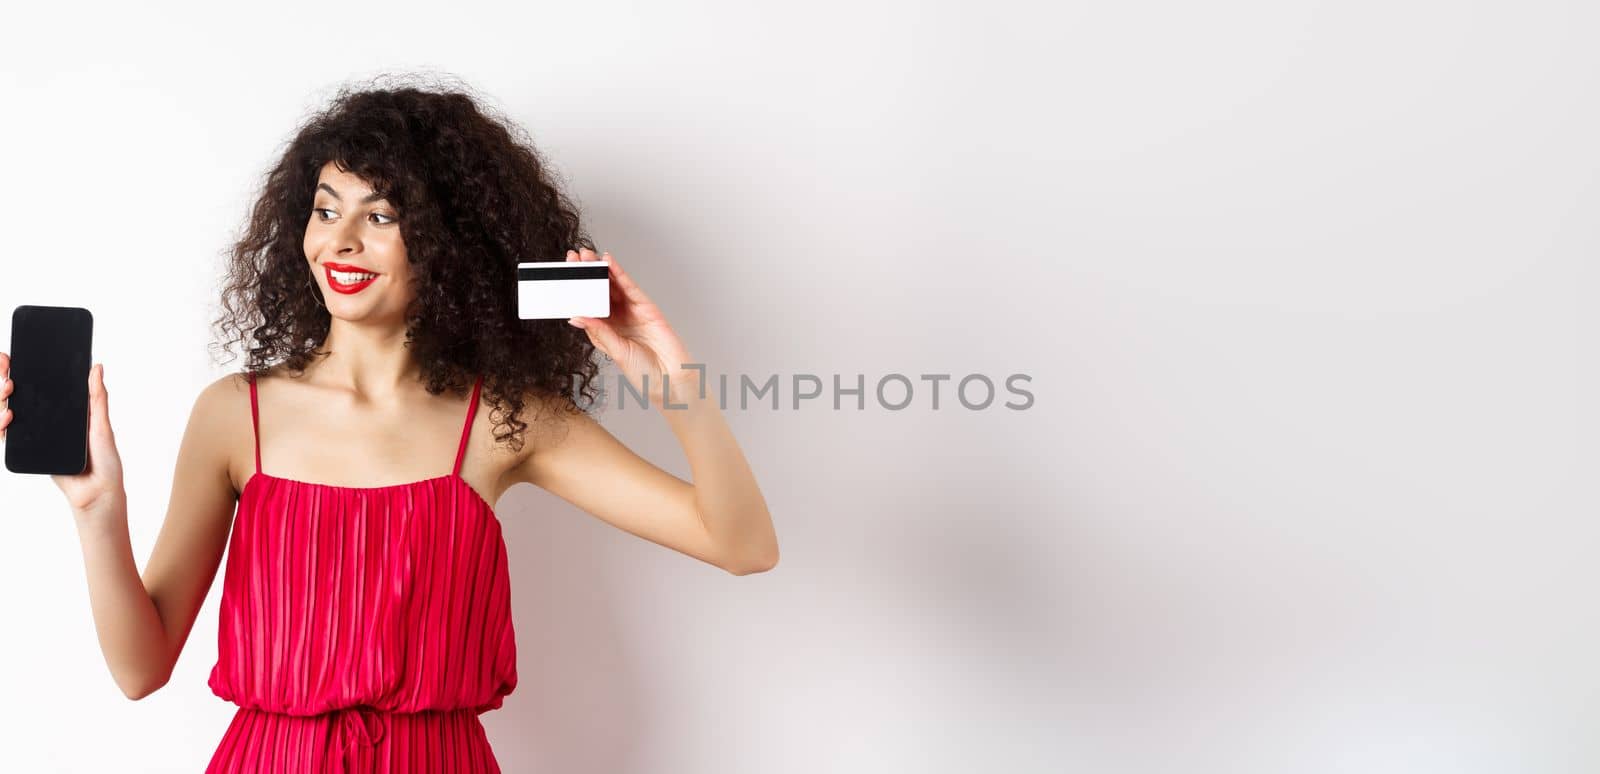 Online shopping concept. Elegant curly-haired woman in red dress showing plastic credit card and empty mobile phone screen, standing over white background.